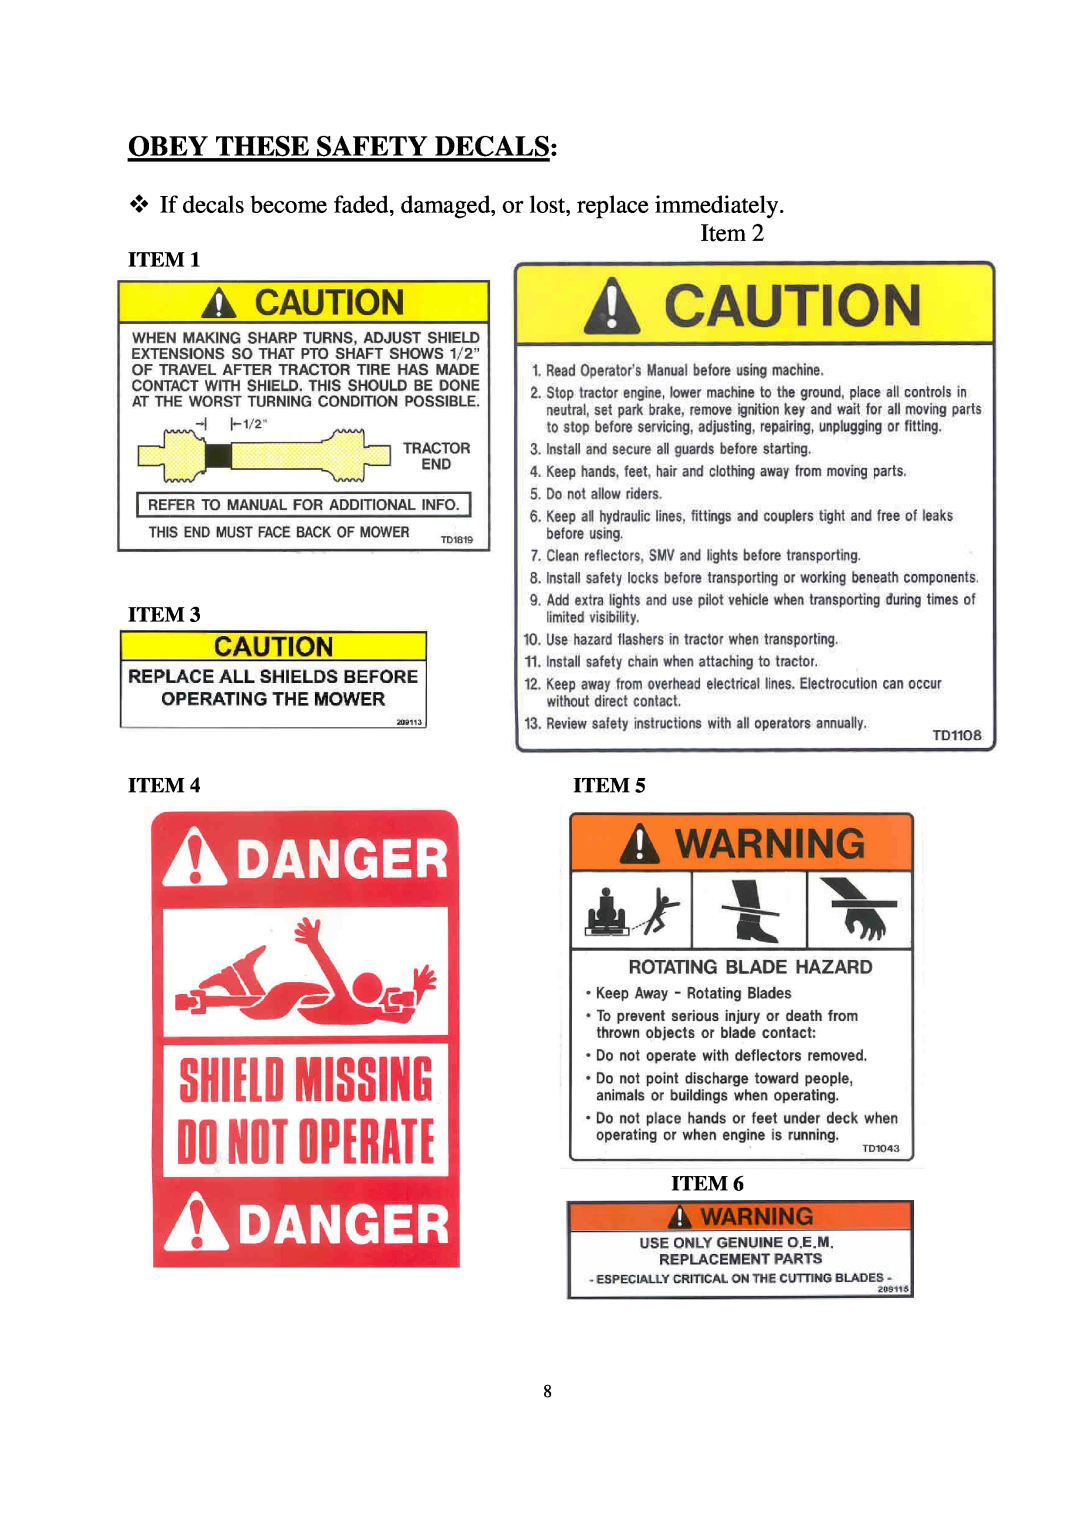 Progressive Turf Equipment SDR65 Obey These Safety Decals,  If decals become faded, damaged, or lost, replace immediately 